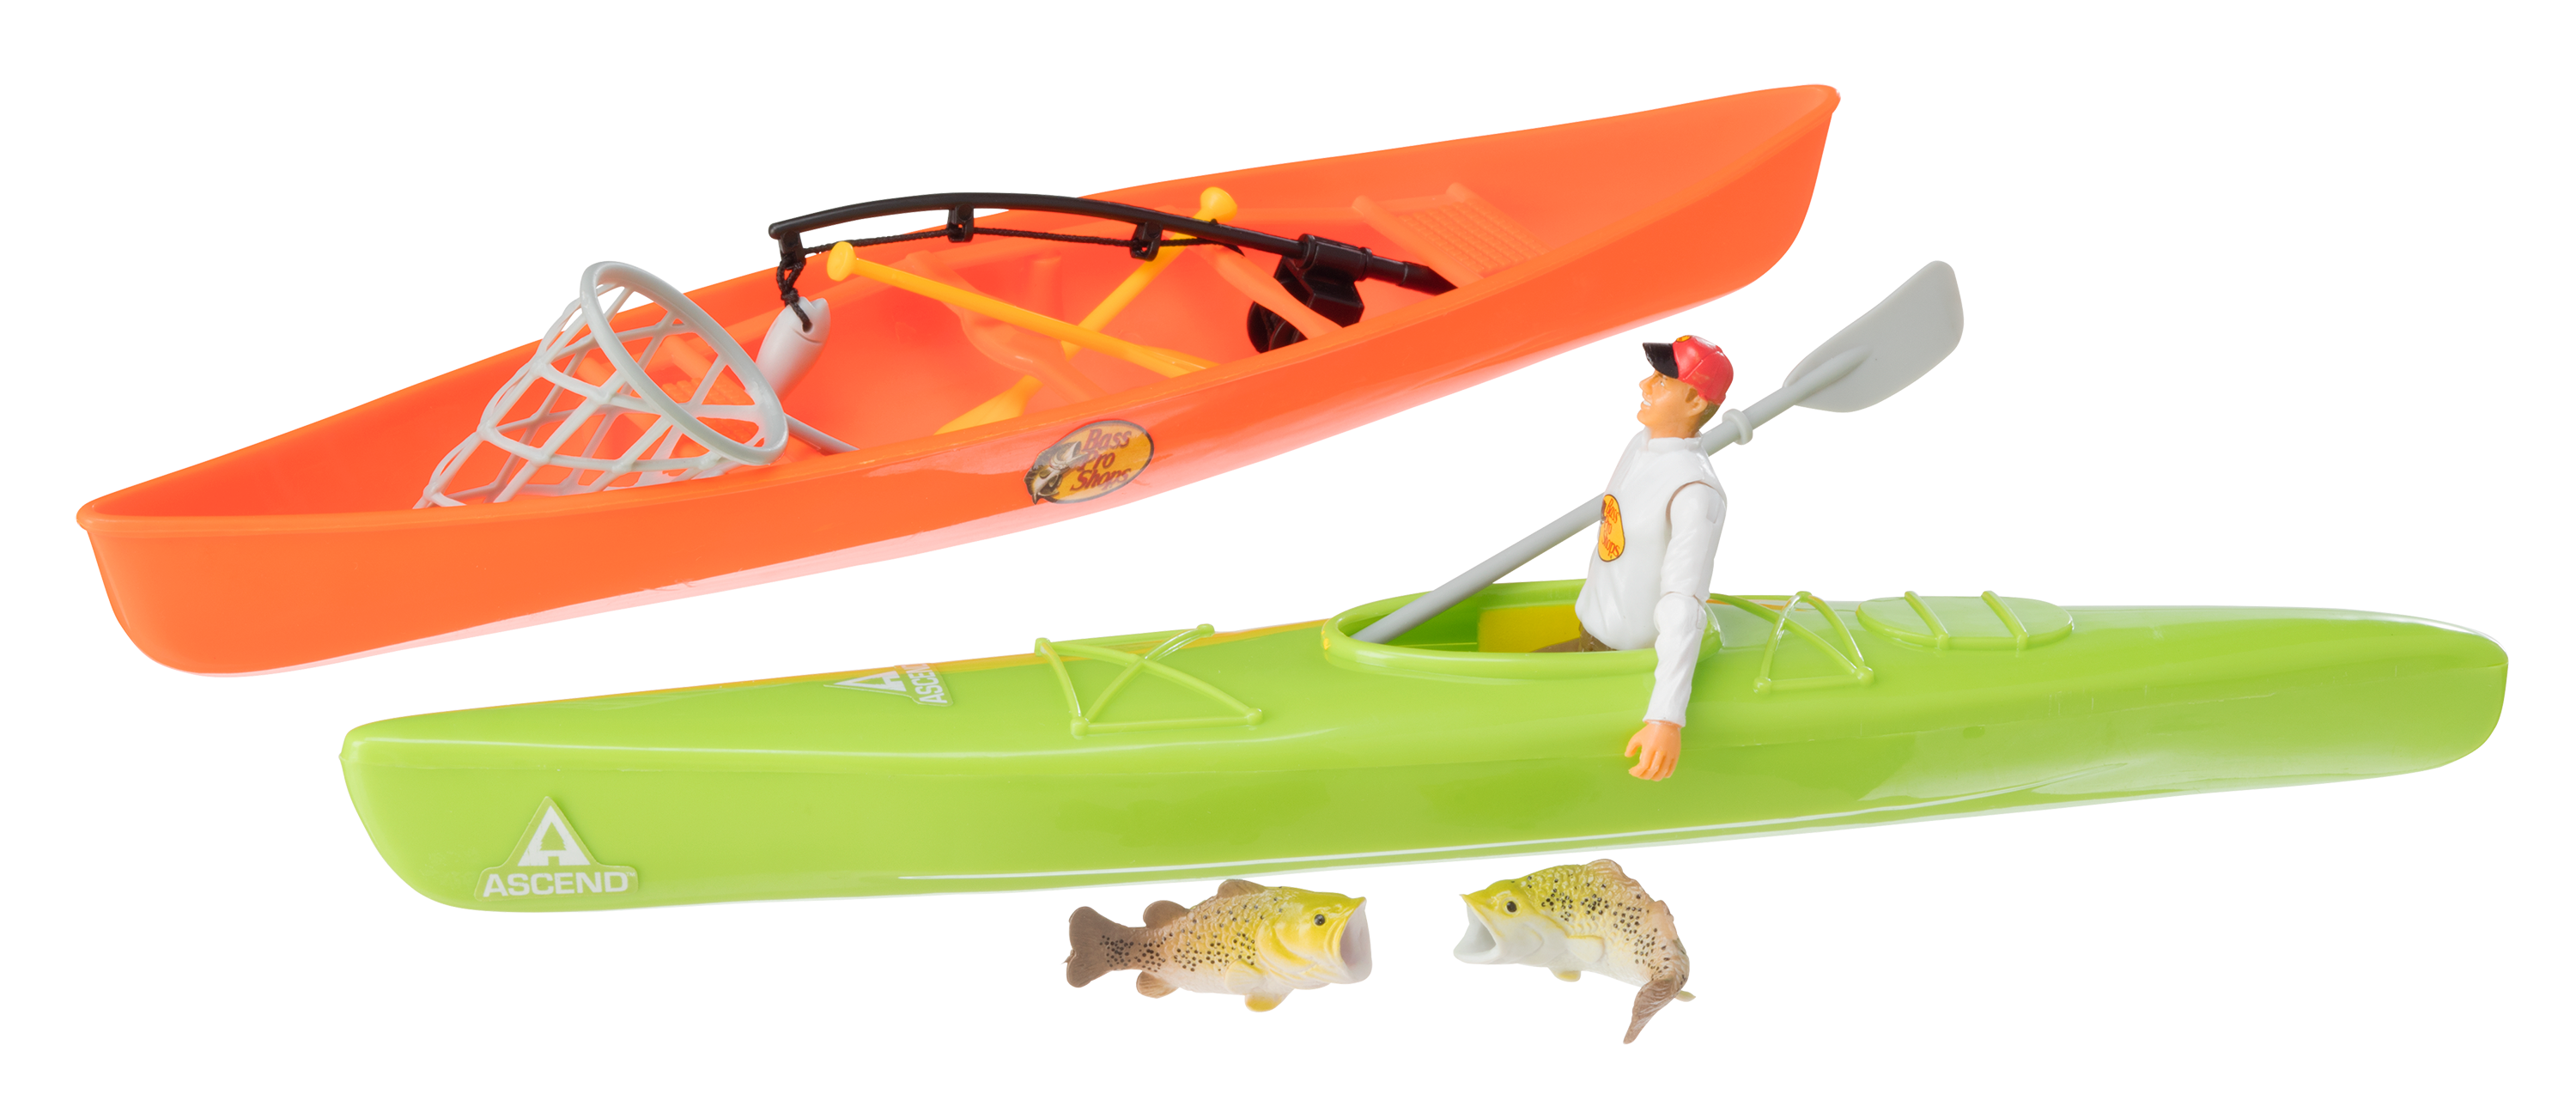 Bass Pro Shops White Water Fishing Adventure Boat Play Set for Kids